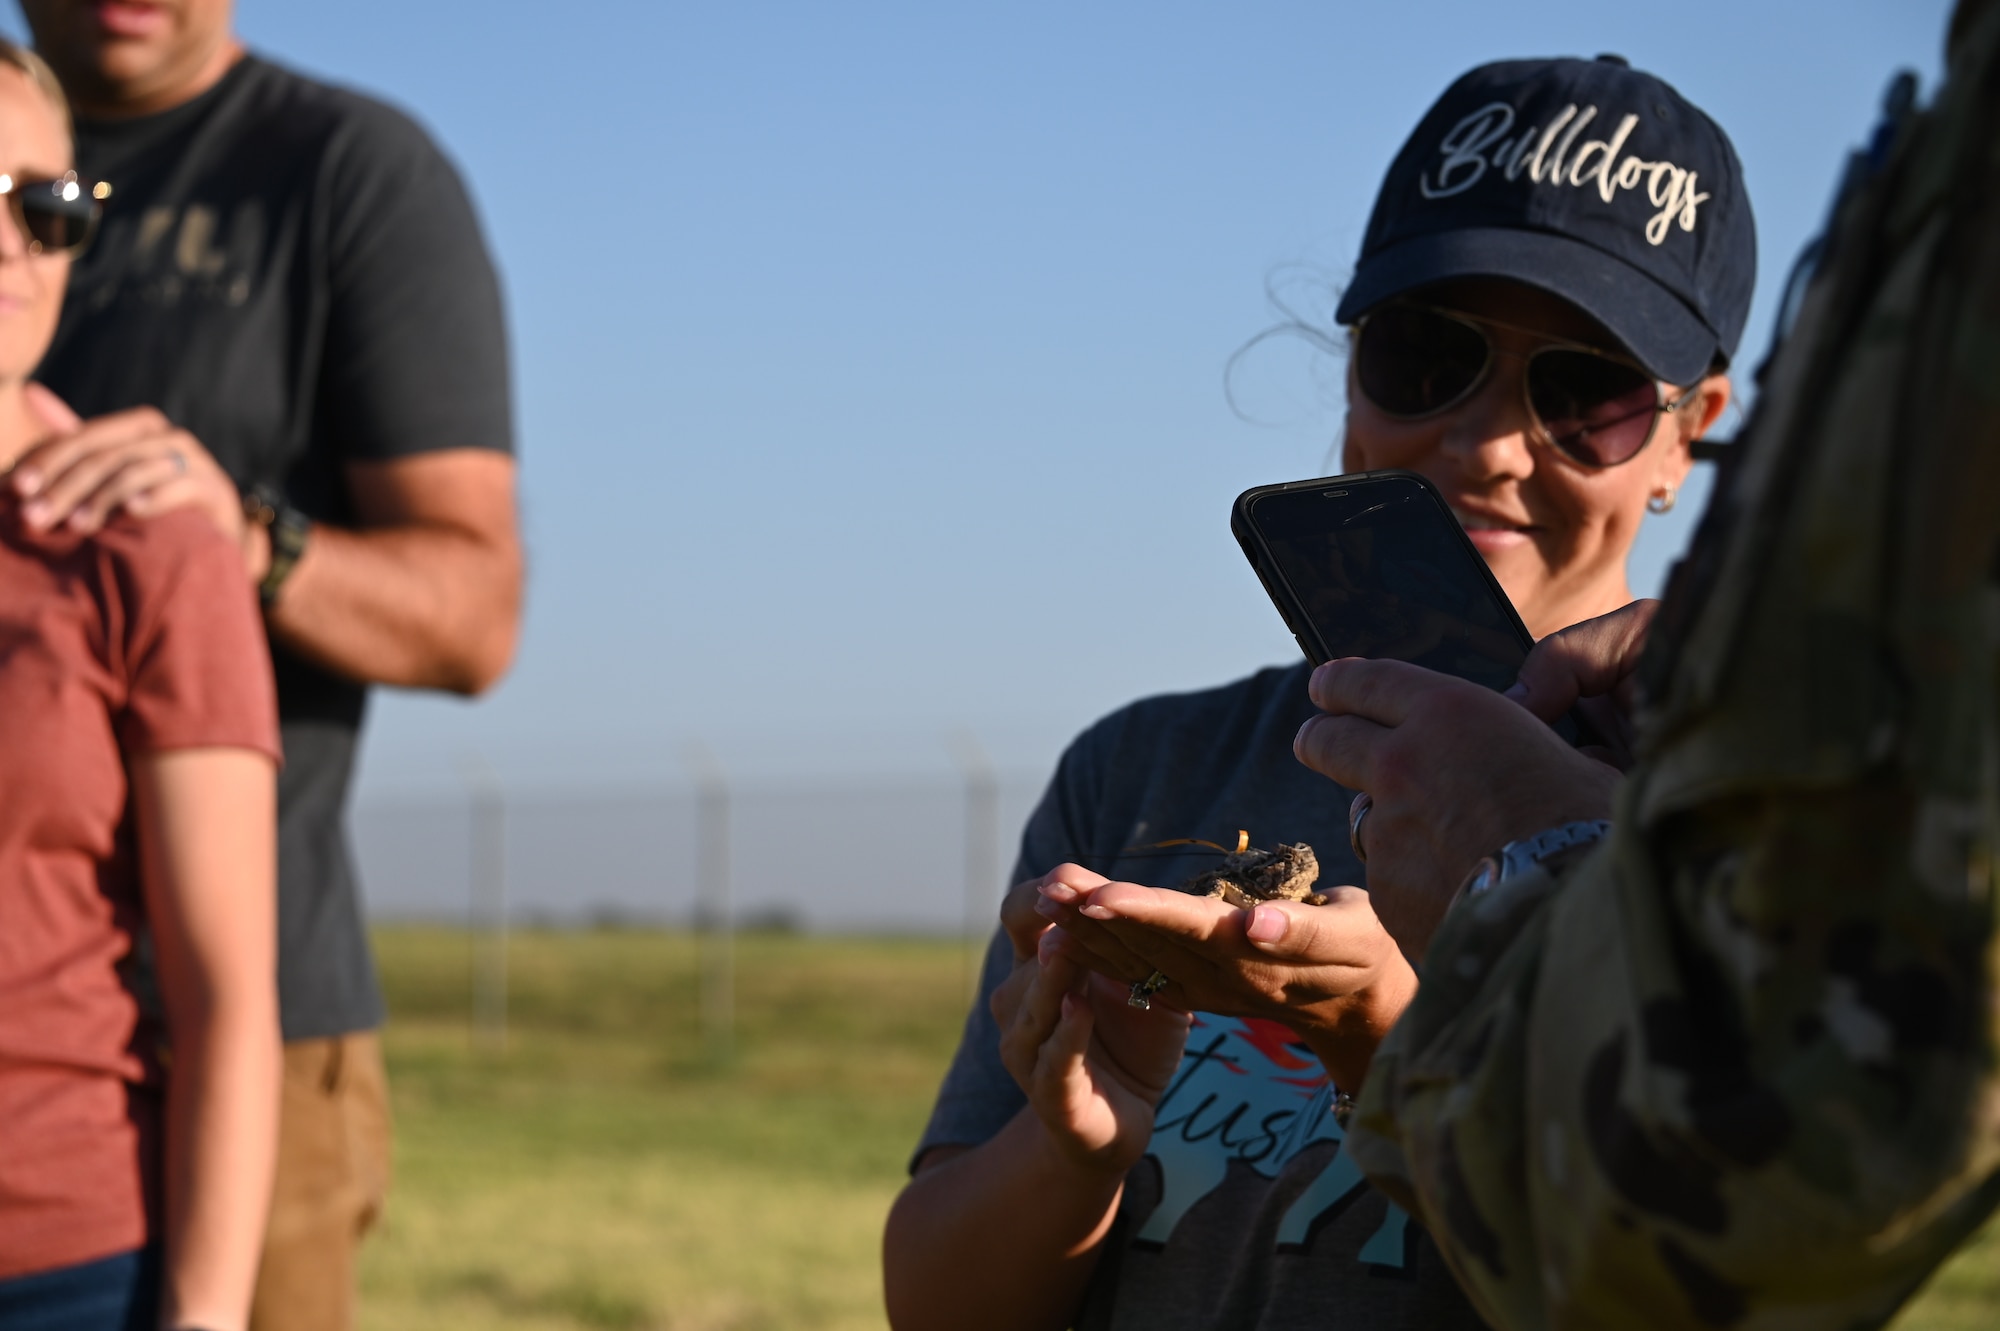 U.S. Air Force Col. Jeff Marshall, 97th Air Mobility Wing (AMW) commander, takes a photo of a Texas horned lizard in the hands of Brenna Marshall, 97th AMW key spouse, at Altus Air Force Base, Oklahoma, Sept. 9, 2023. The Texas horned lizard is a protected species and can be found throughout Oklahoma, Texas, Kansas, New Mexico, and Mexico. (U.S. Air Force photo by Airman 1st Class Kari Degraffenreed)